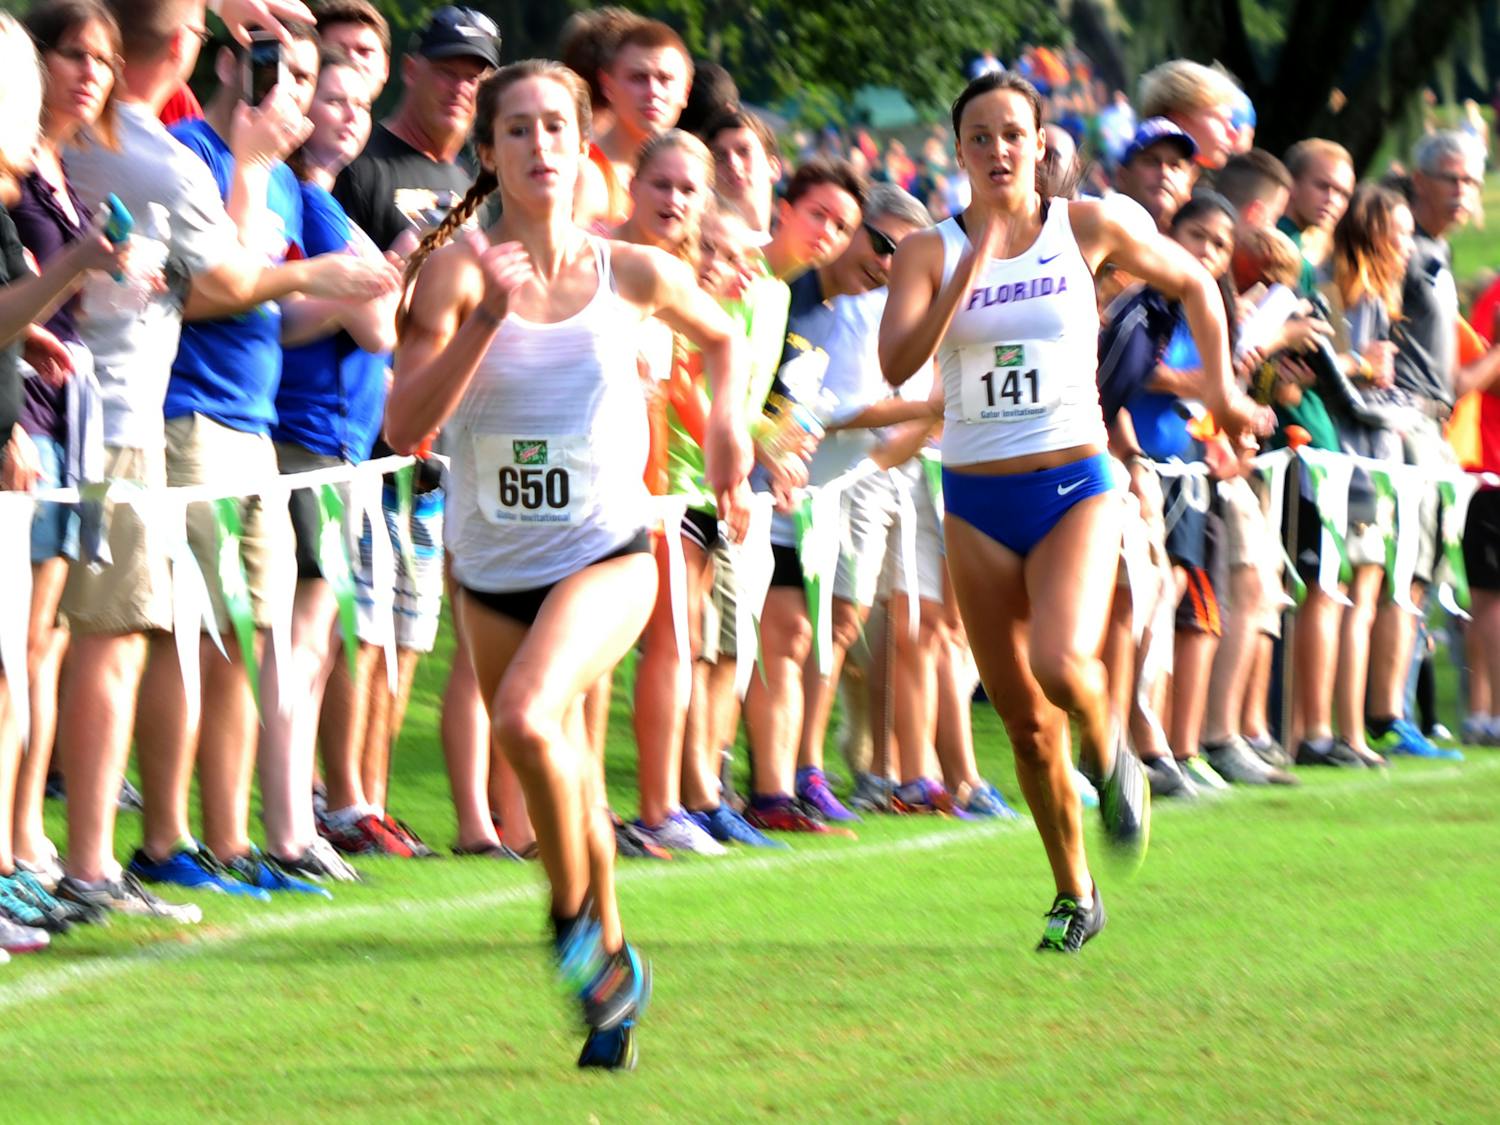 UF's Becky Greene (right) races to the finish during the Mountain Dew Invitational on Sept. 19, 2015, at the Mark Bostick Golf Course.